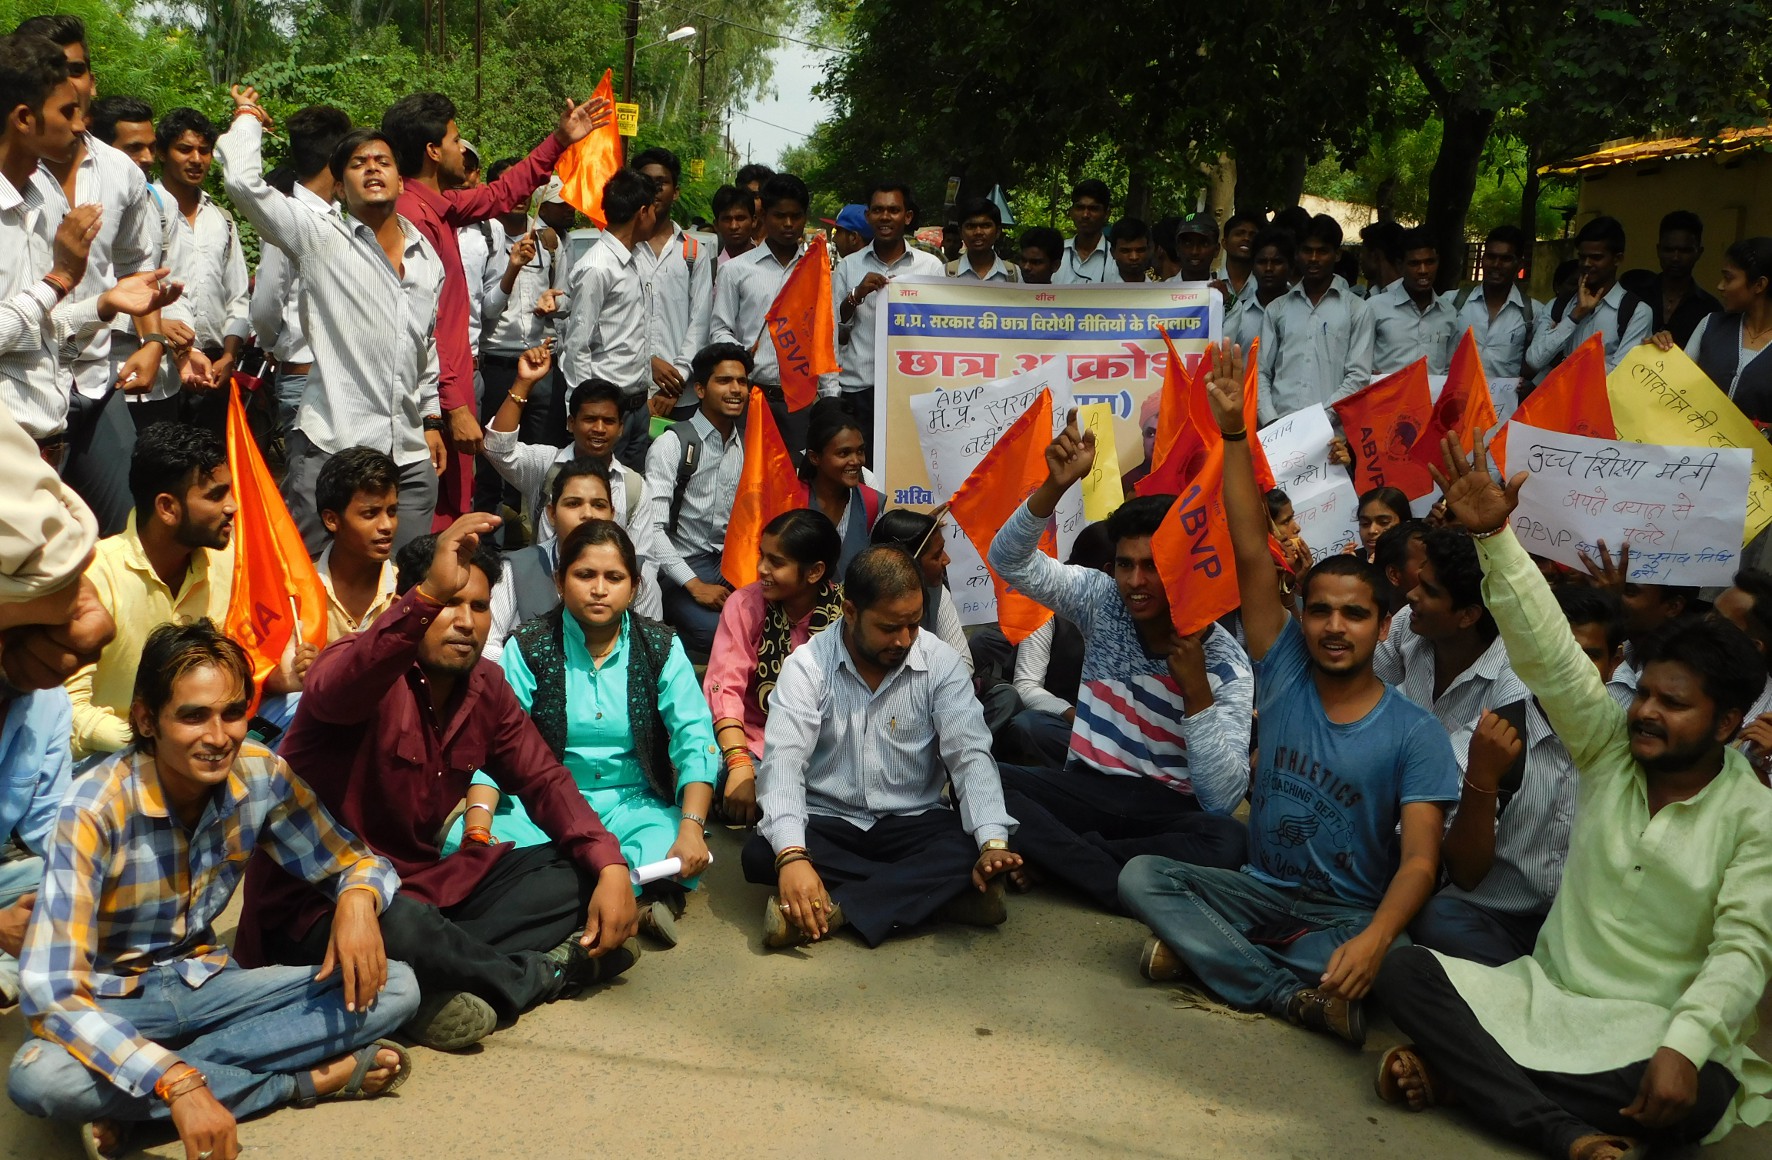 For students elections the ABVP has done the road